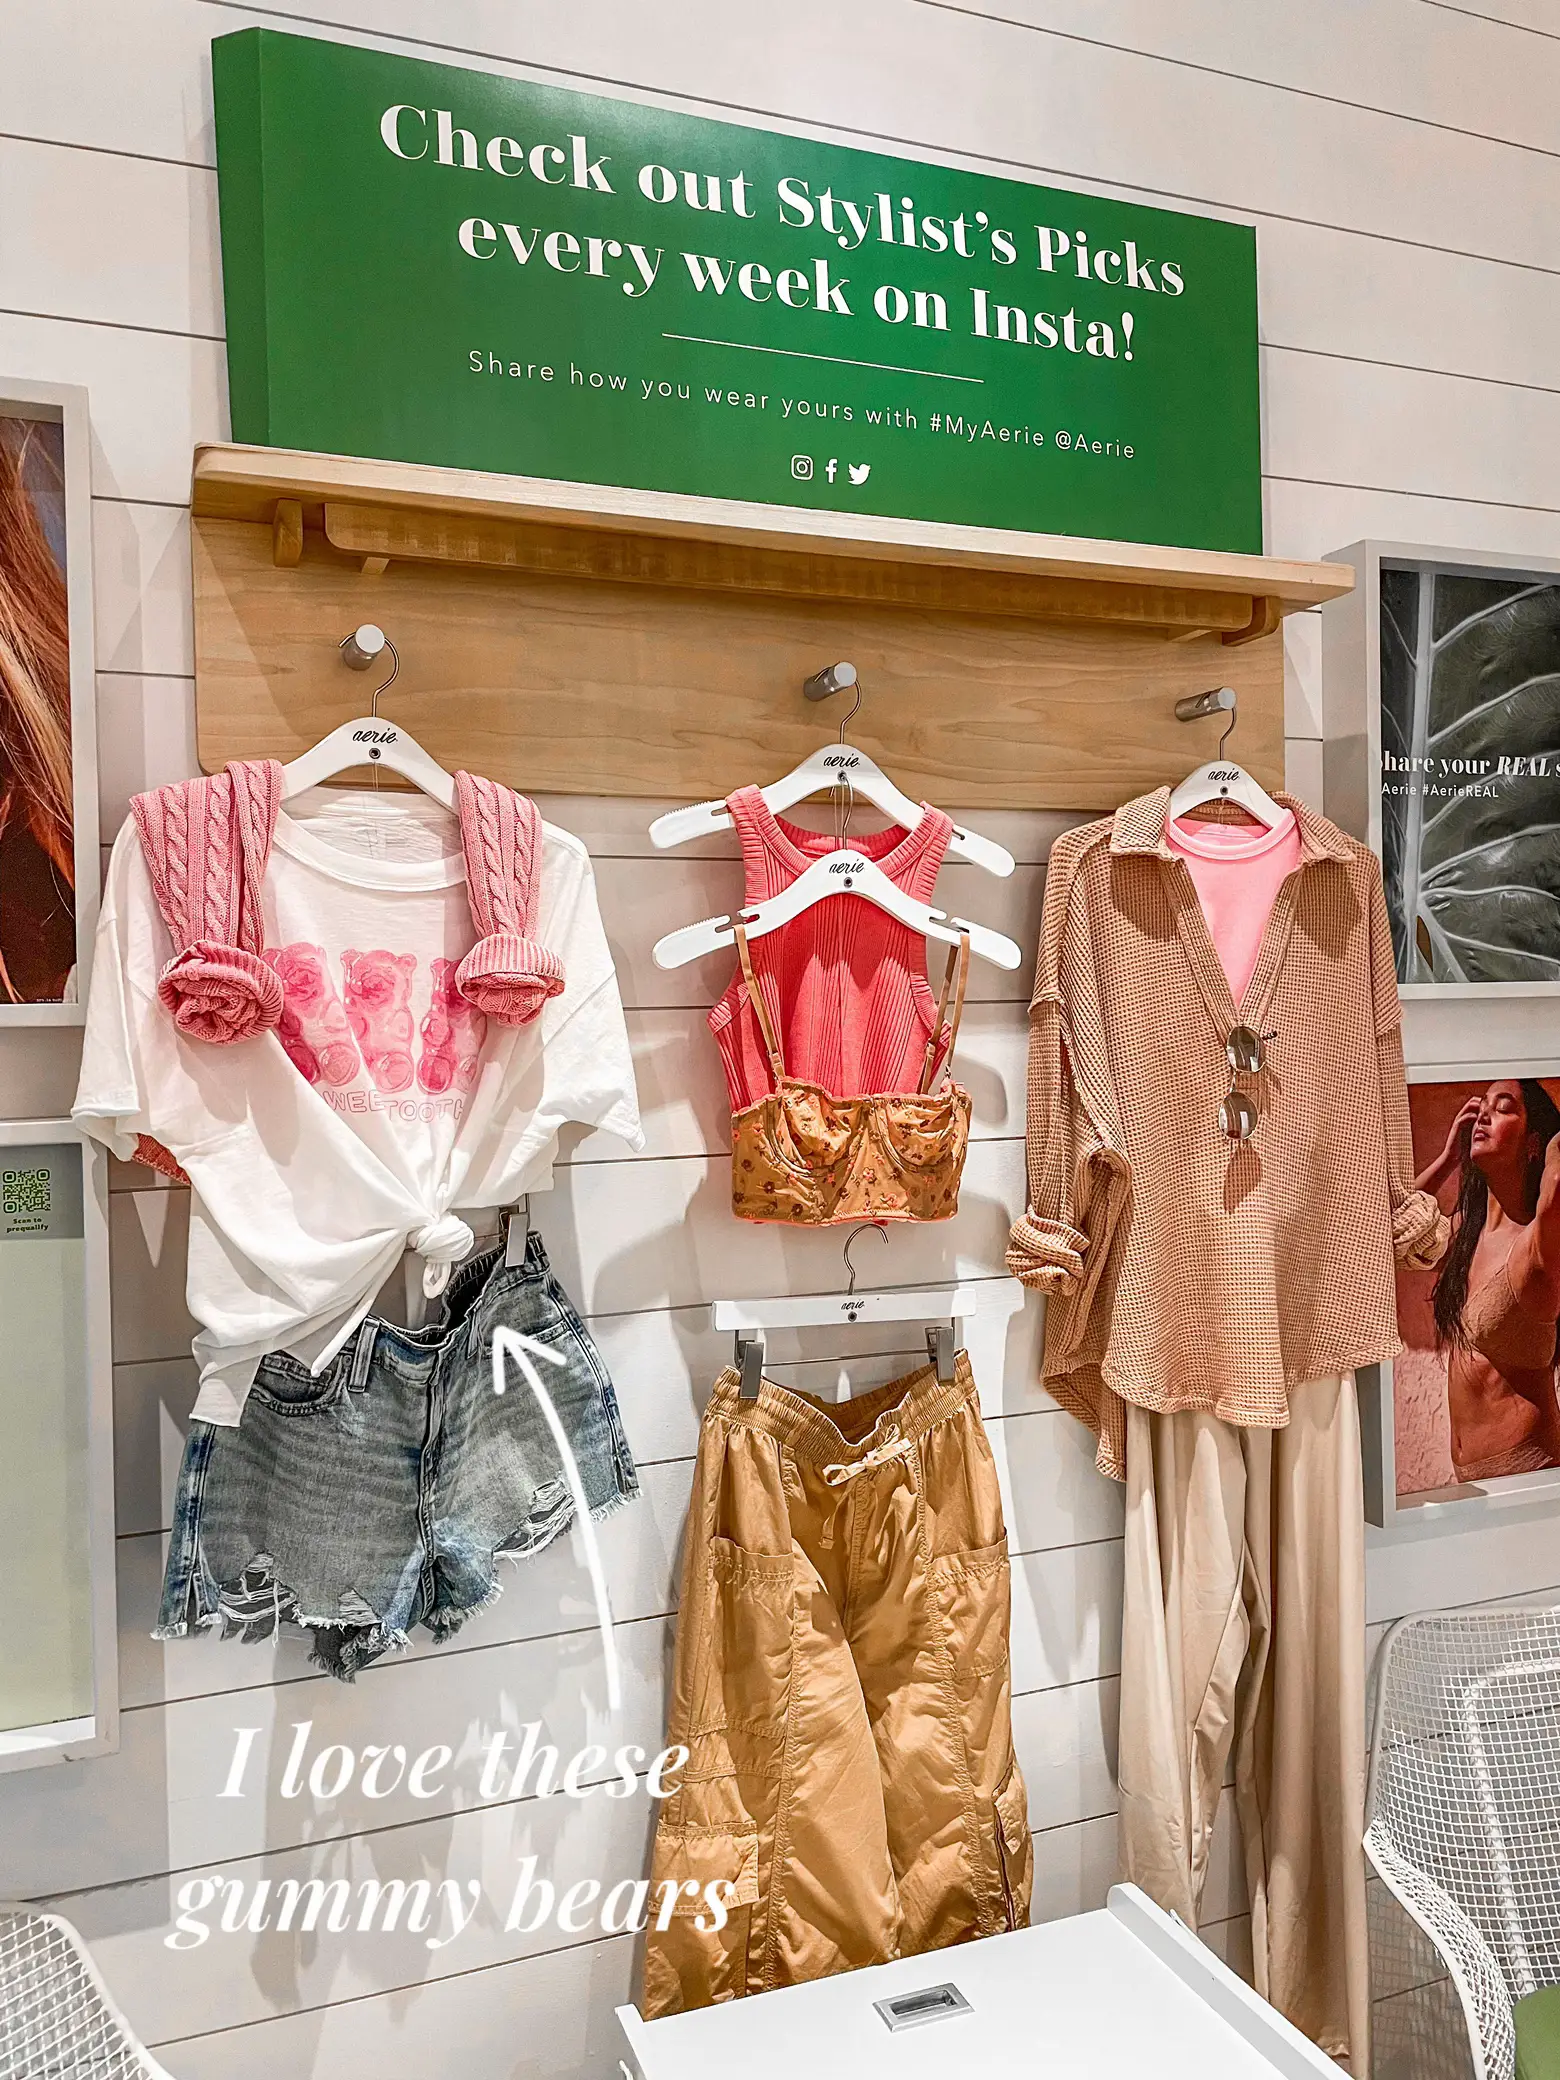 Have you ever paid full price for Aerie!?, Gallery posted by mwhalen__